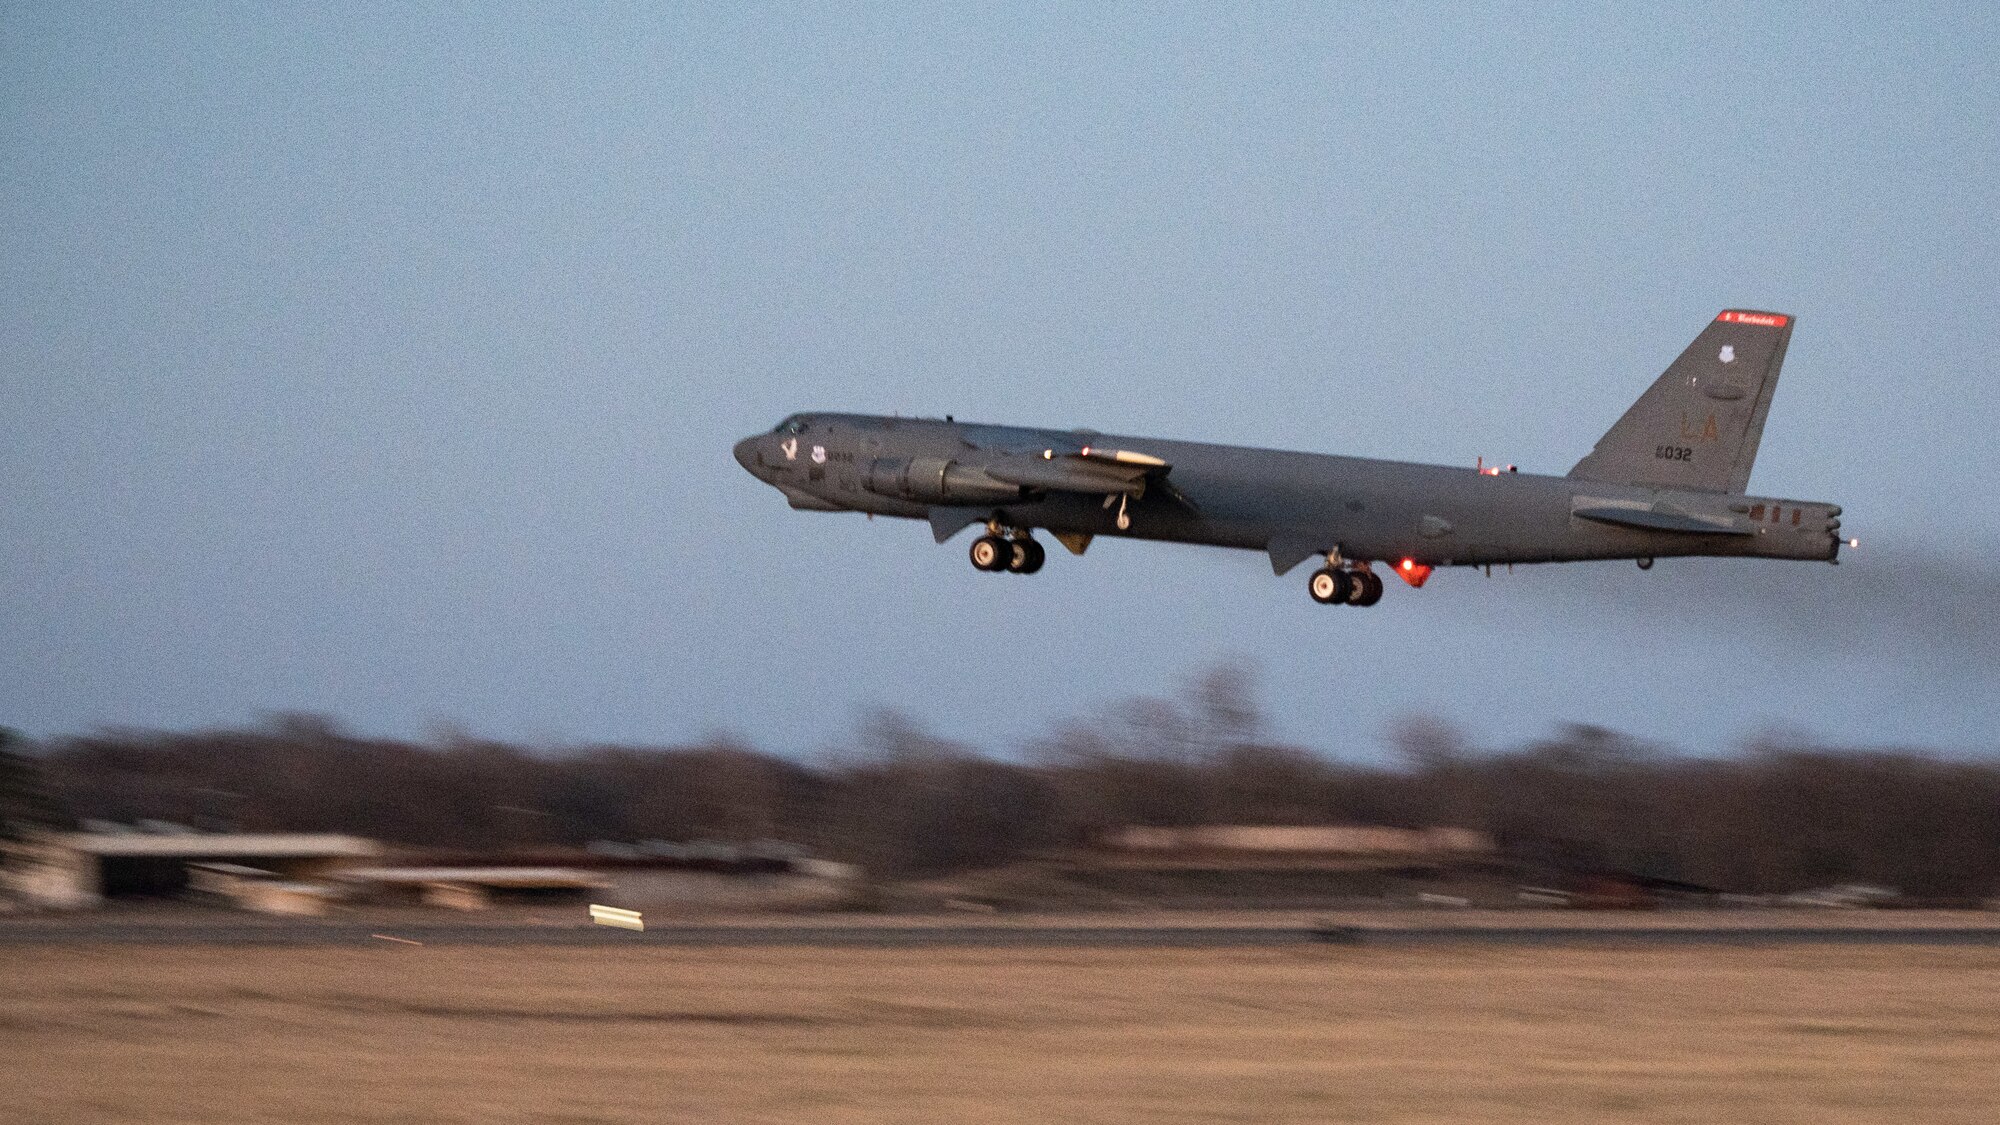 To maintain mission readiness, Barksdale is capable of dispatching B-52s at any hour.